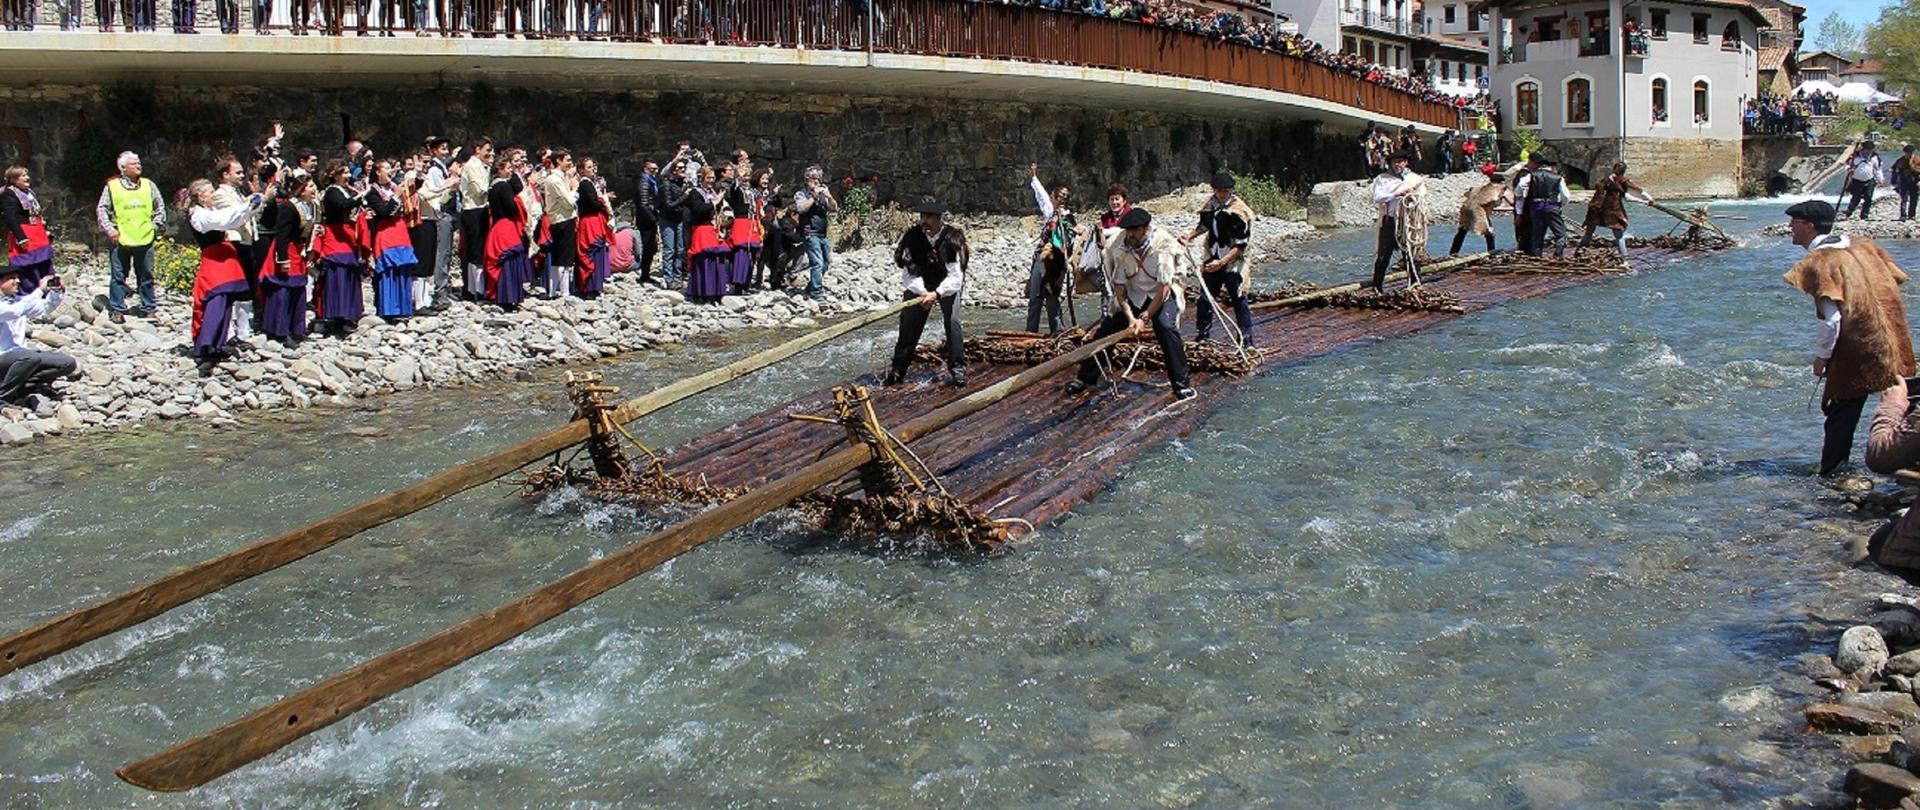 Timber rafting in Poland